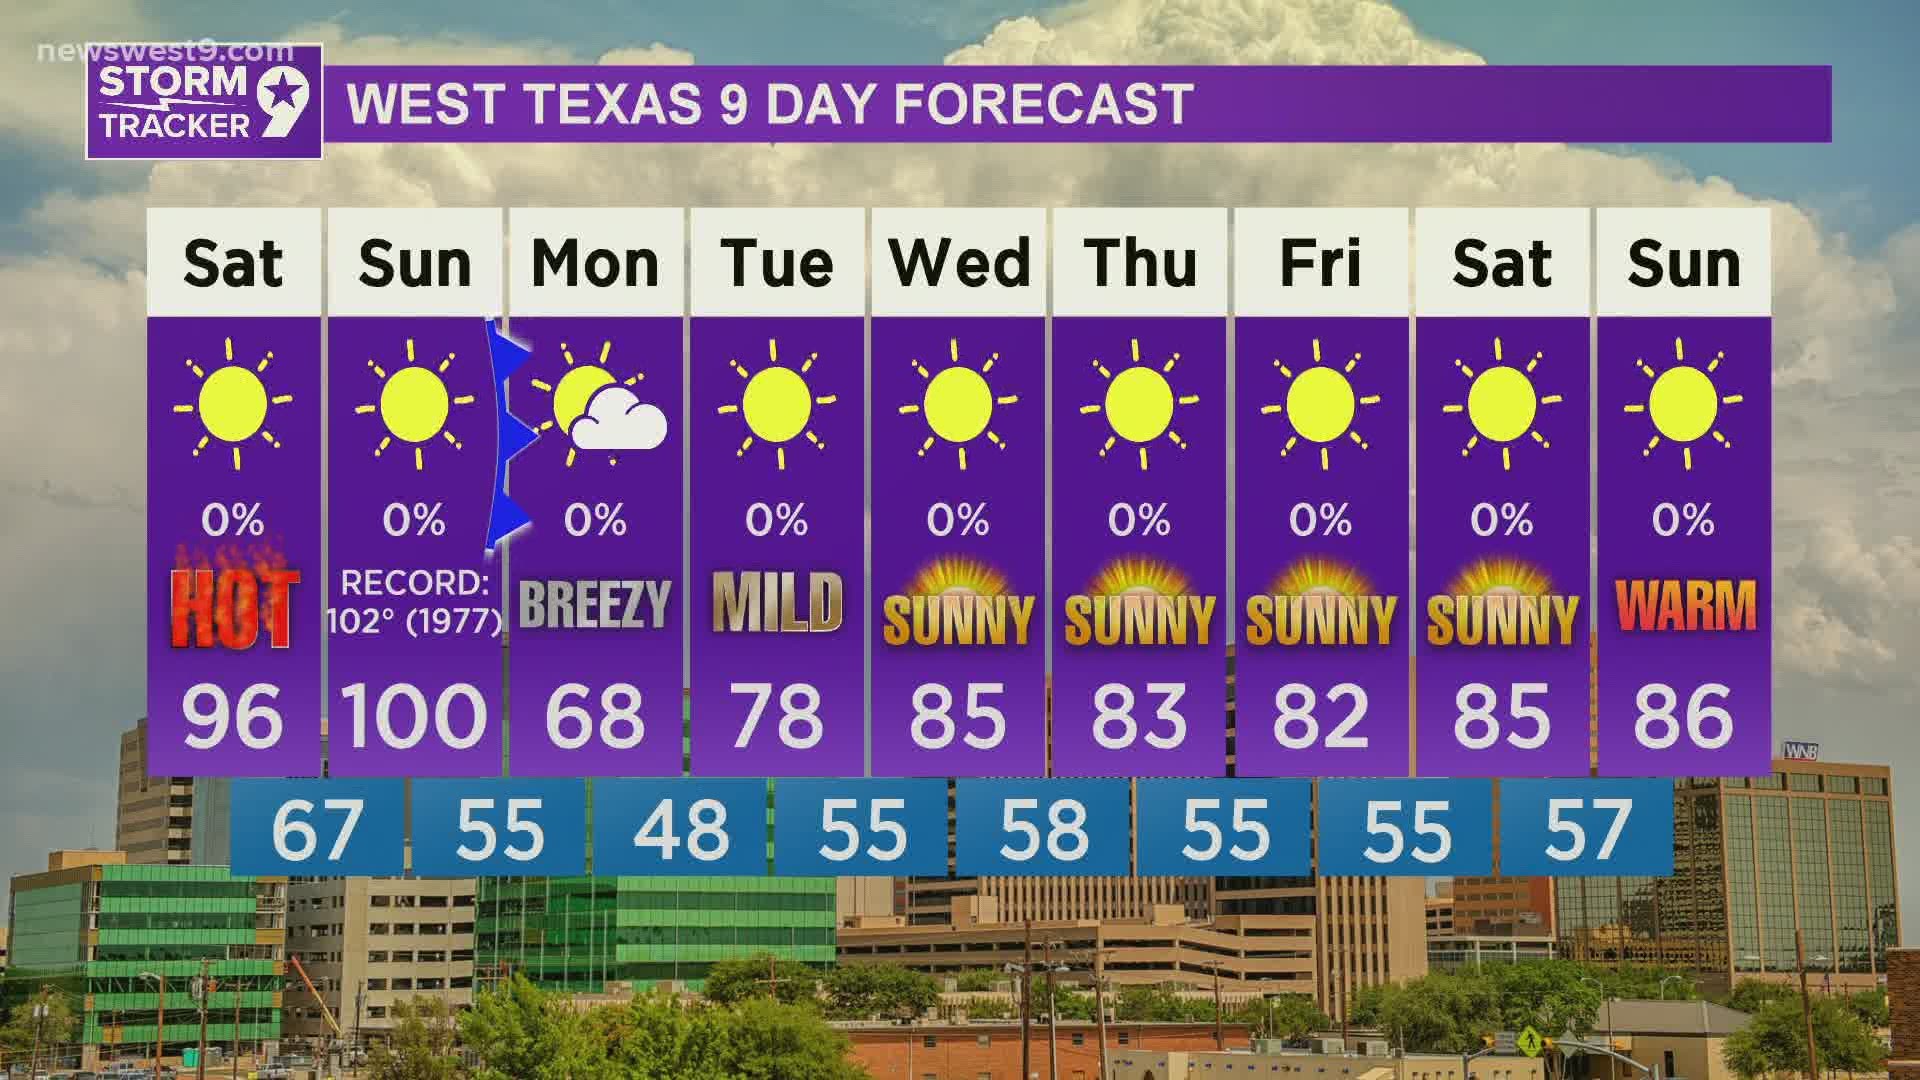 Hot this weekend with triple digits on Sunday, then much cooler Monday as a Fall front sweeps through Texas